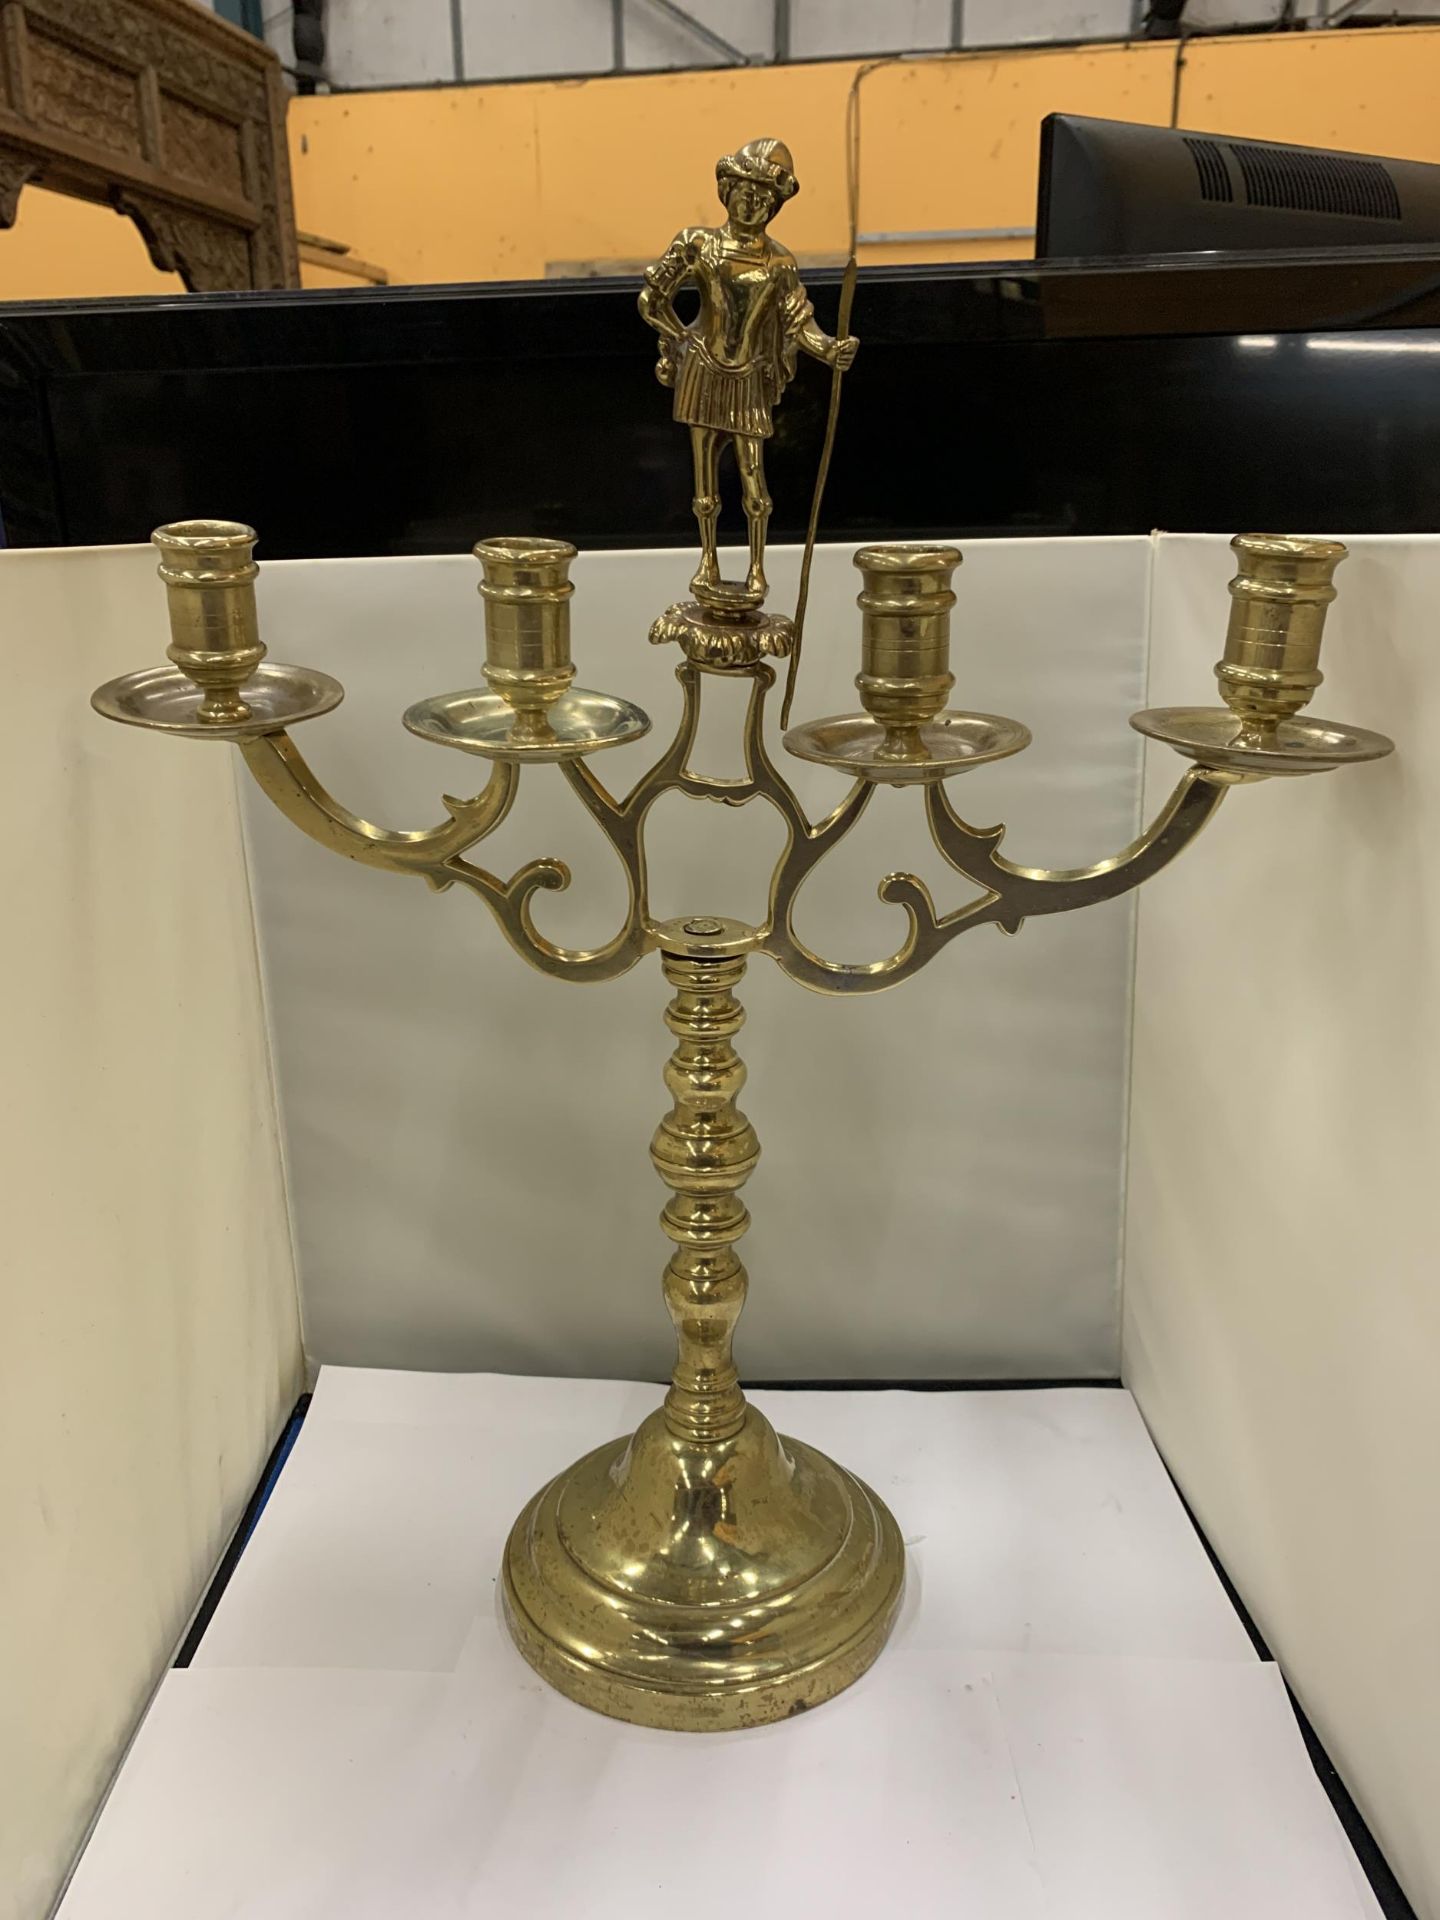 A HEAVY BRASS CANDELABRA WITH A FIGURE HOLDING A STAFF